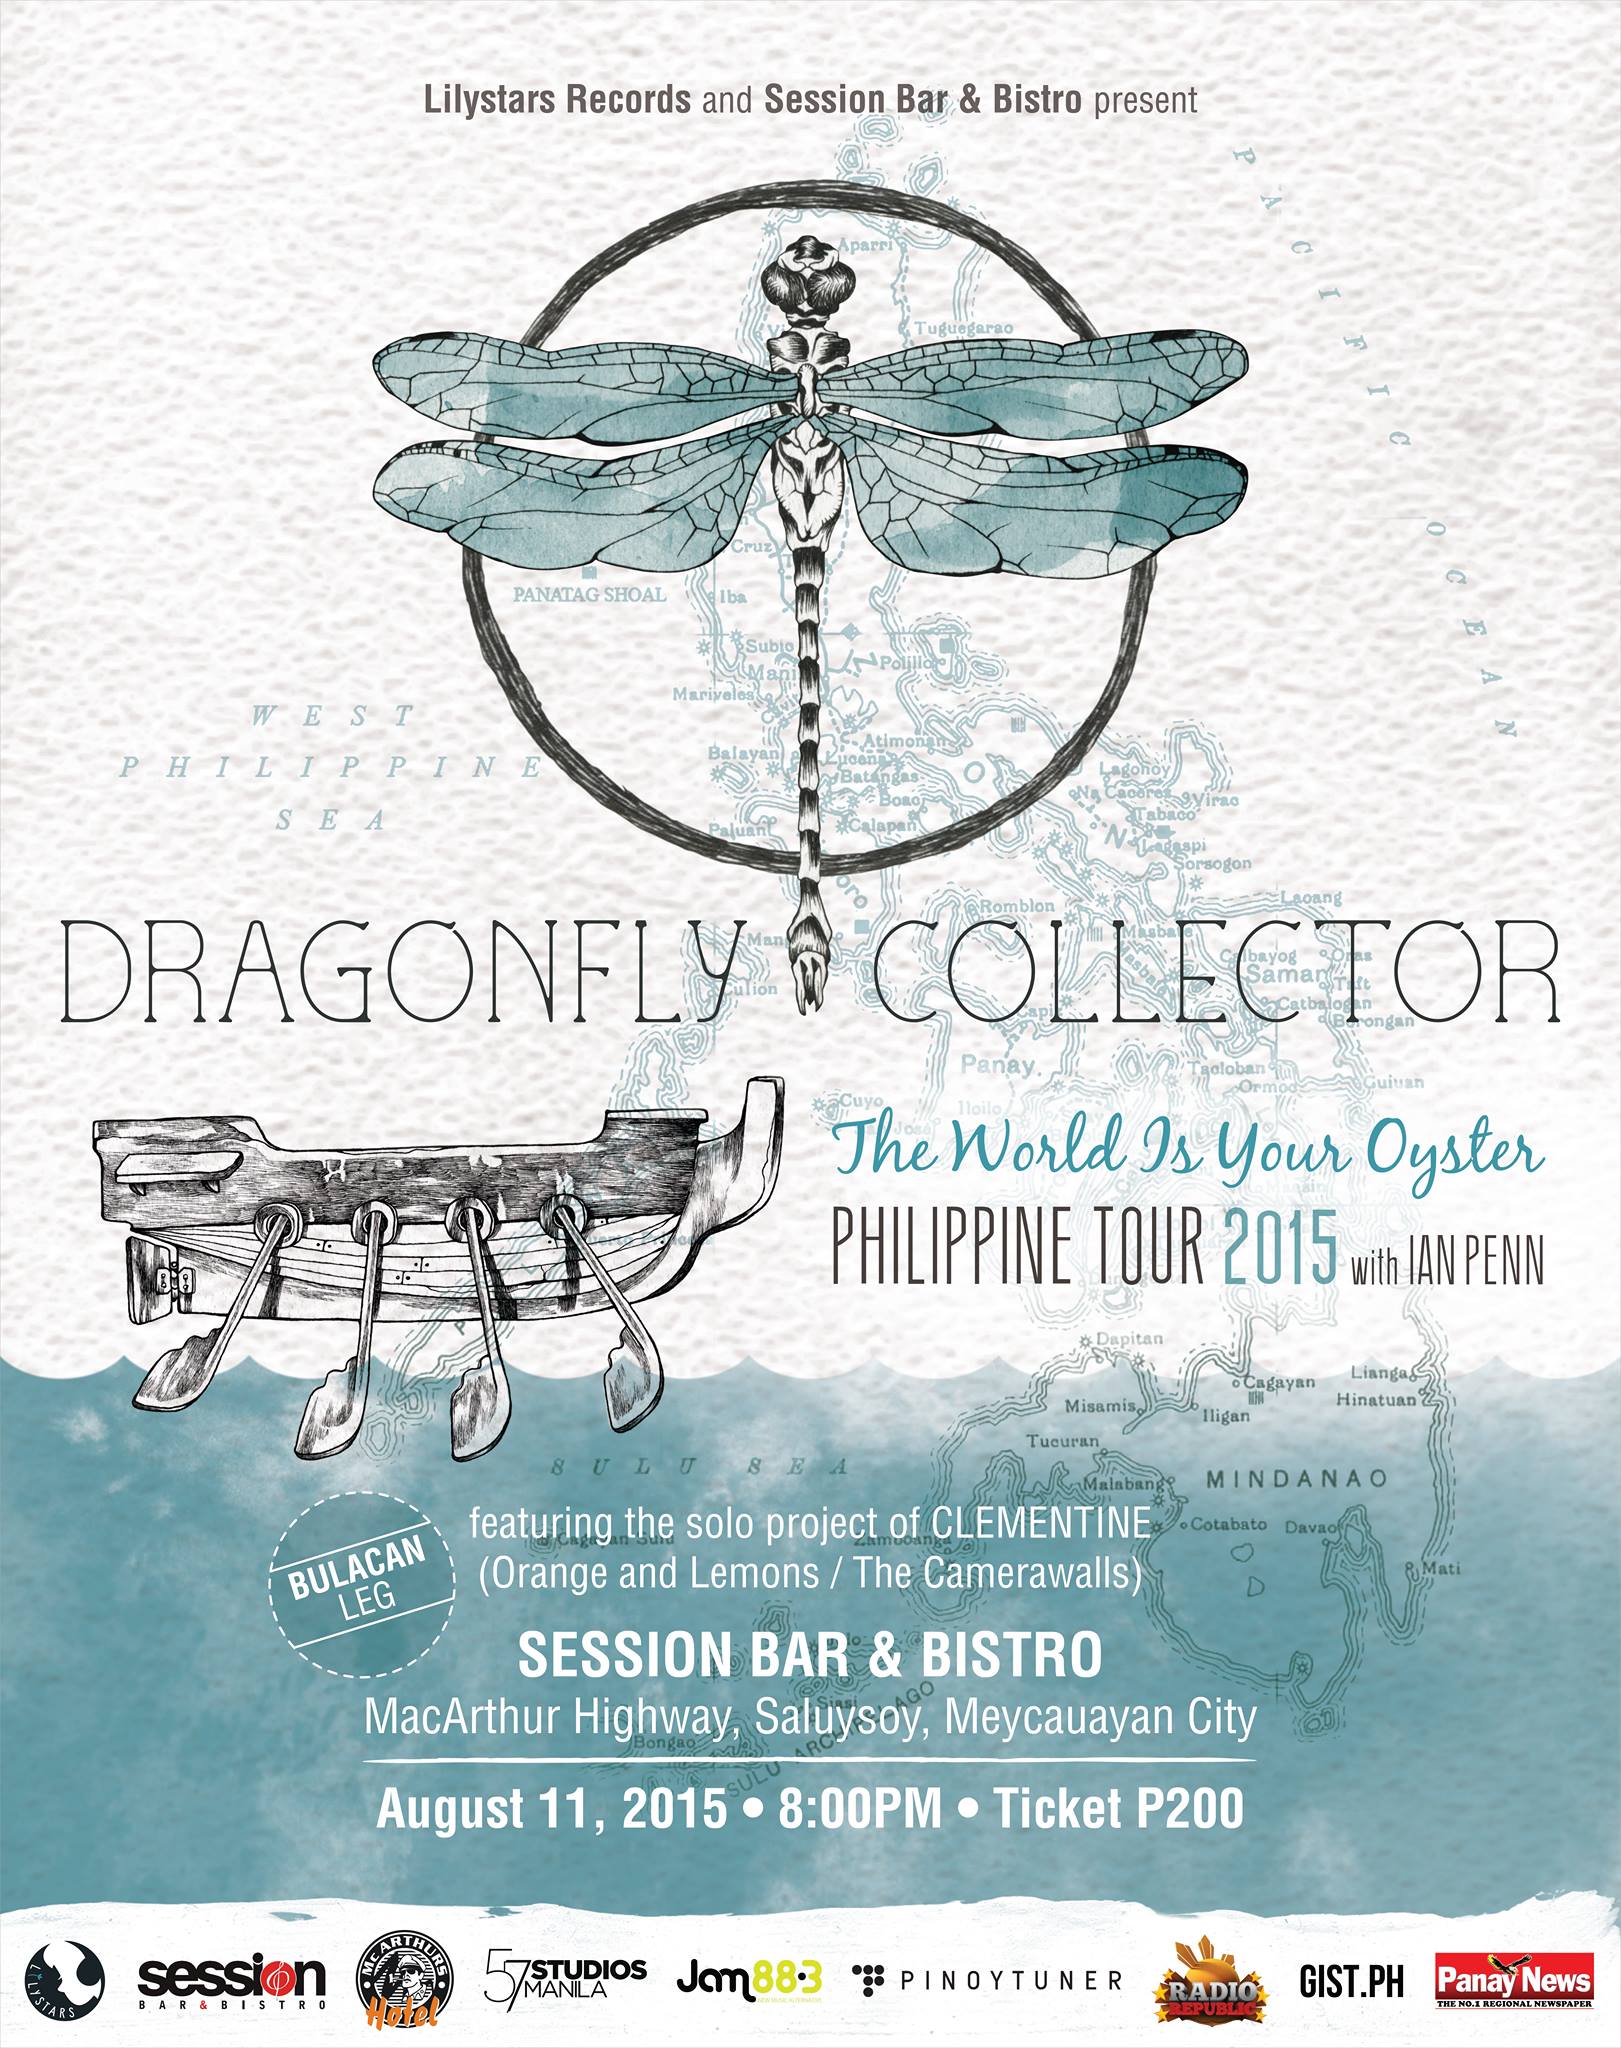 DRAGONFLY COLLECTOR: The World Is Your Oyster Philippine Tour 2015 [Meycauayan City Leg]     Tuesday, August 11     at 8:00pm     	     Show Map     Session Bar & Bistro     Mc Arthur Hi-Way, Saluysoy, 3020 Meycauayan, Bulacan Lilystars Records and Session Bar & Bistro present DRAGONFLY COLLECTOR The World Is Your Oyster Philippine Tour 2015 (Meycauayan City Leg) with Ian Penn (featuring the solo project of Clementine (Orange & Lemons / The Camerawalls) SESSION BAR & BISTRO MacArthur Highway, Saluysoy, Meycauayan City August 11, 2015, 8:00 PM Tickets: P200 For tickets and reservations e-mail info@dragonflycollector or contact 09164004343 / 09175386569 / 09175214304 Also brought to you by Jam 88.3, Pinoytuner, Radio Republic, Gist, 57 Studios Manila, Panay News and MacArthur's Hotel Tour Poster by Ige Trinidad Visit the official site http://dragonflycollector.com/ Sign up to the mailing list: http://dragonflycollector.fanbridge.com/